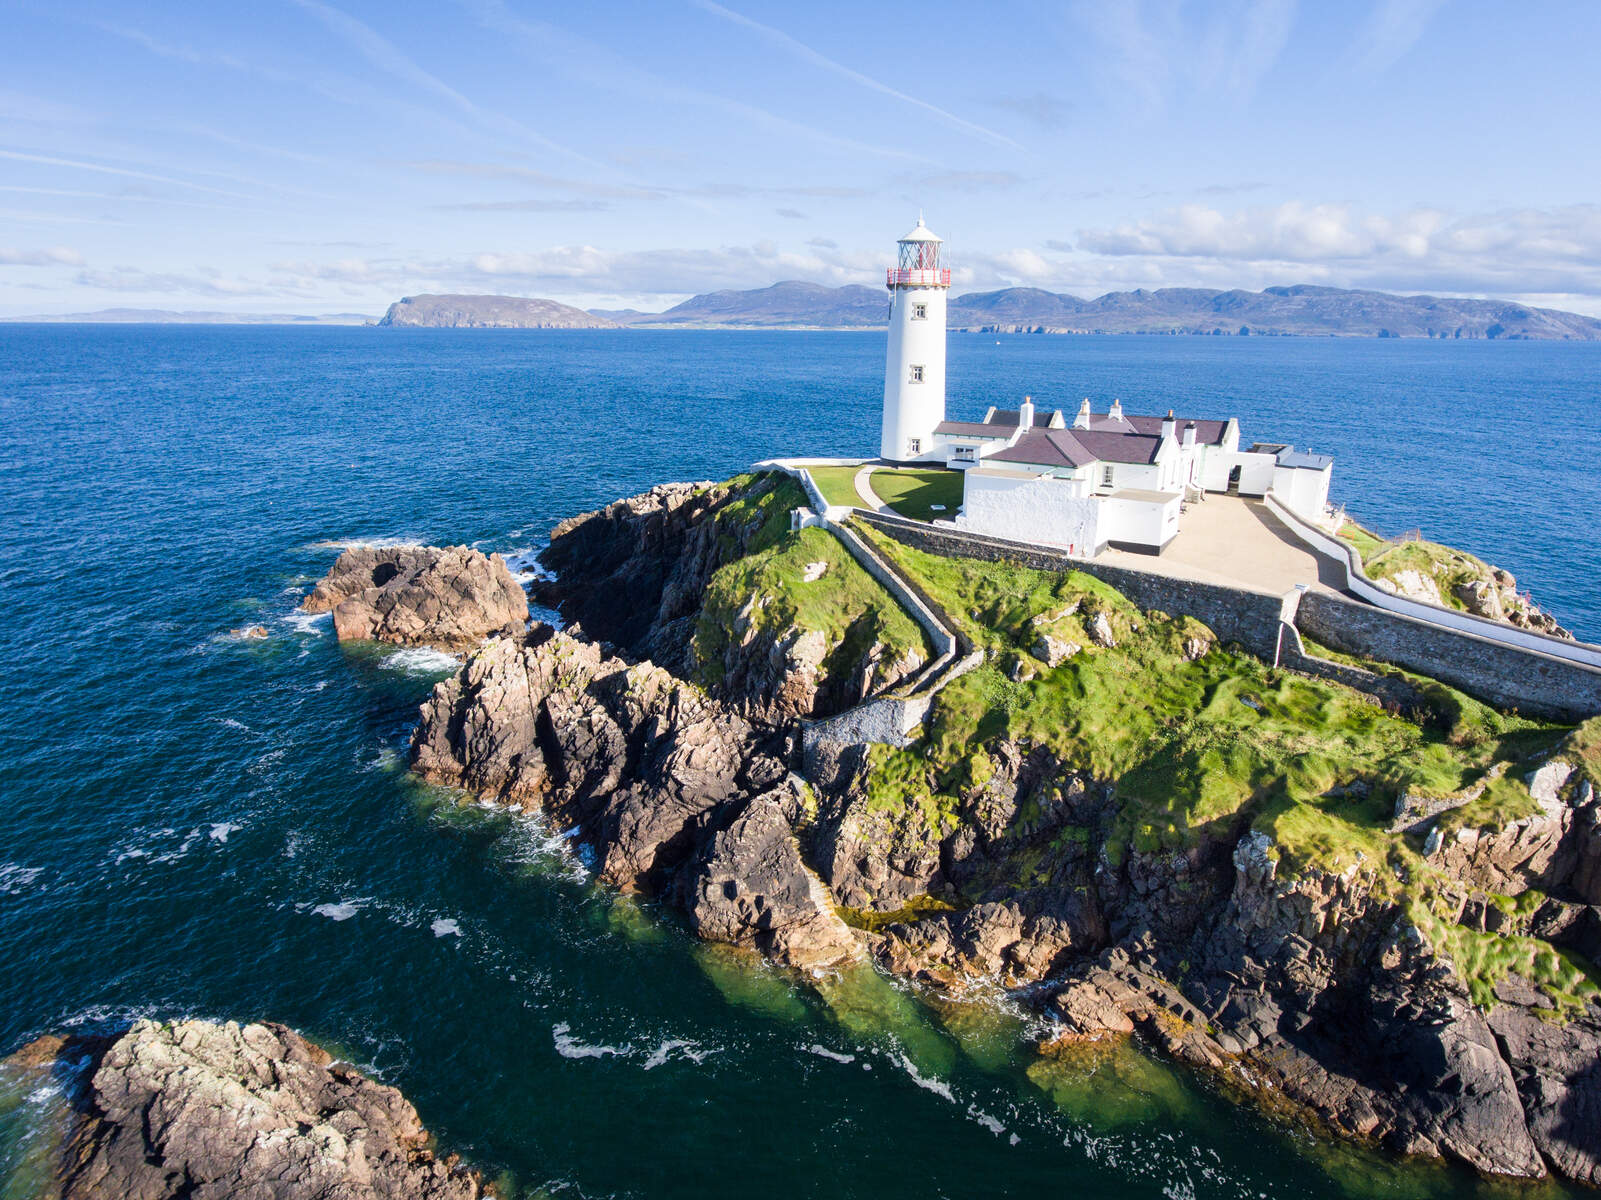 Fanad Head Lighthouse, Co. Donegal